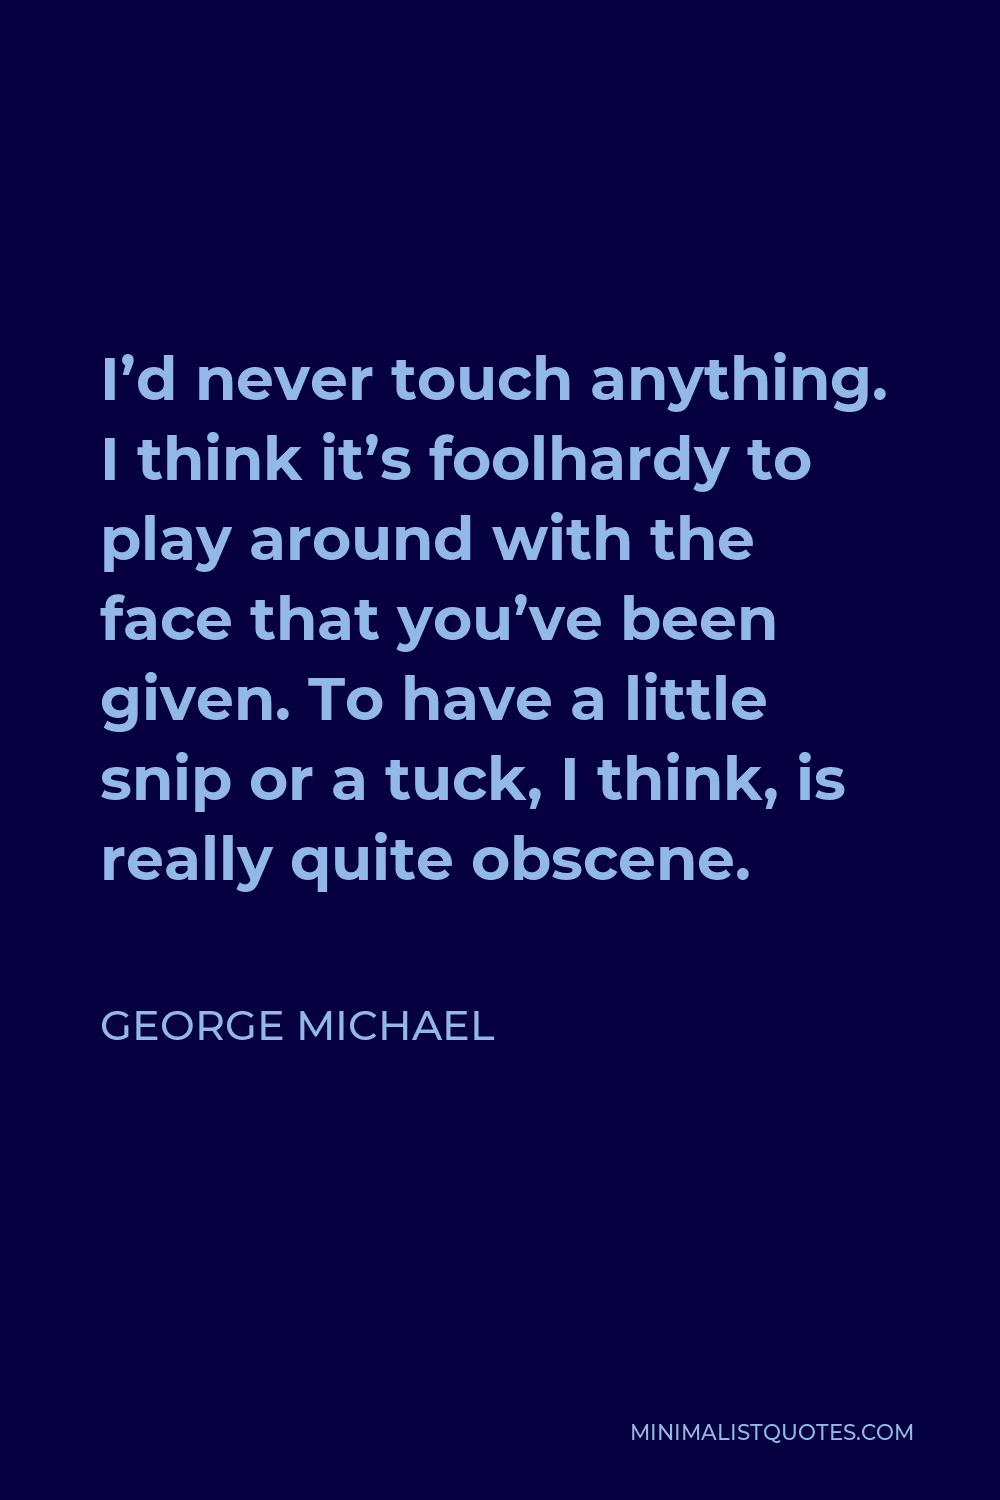 George Michael Quote - I’d never touch anything. I think it’s foolhardy to play around with the face that you’ve been given. To have a little snip or a tuck, I think, is really quite obscene.